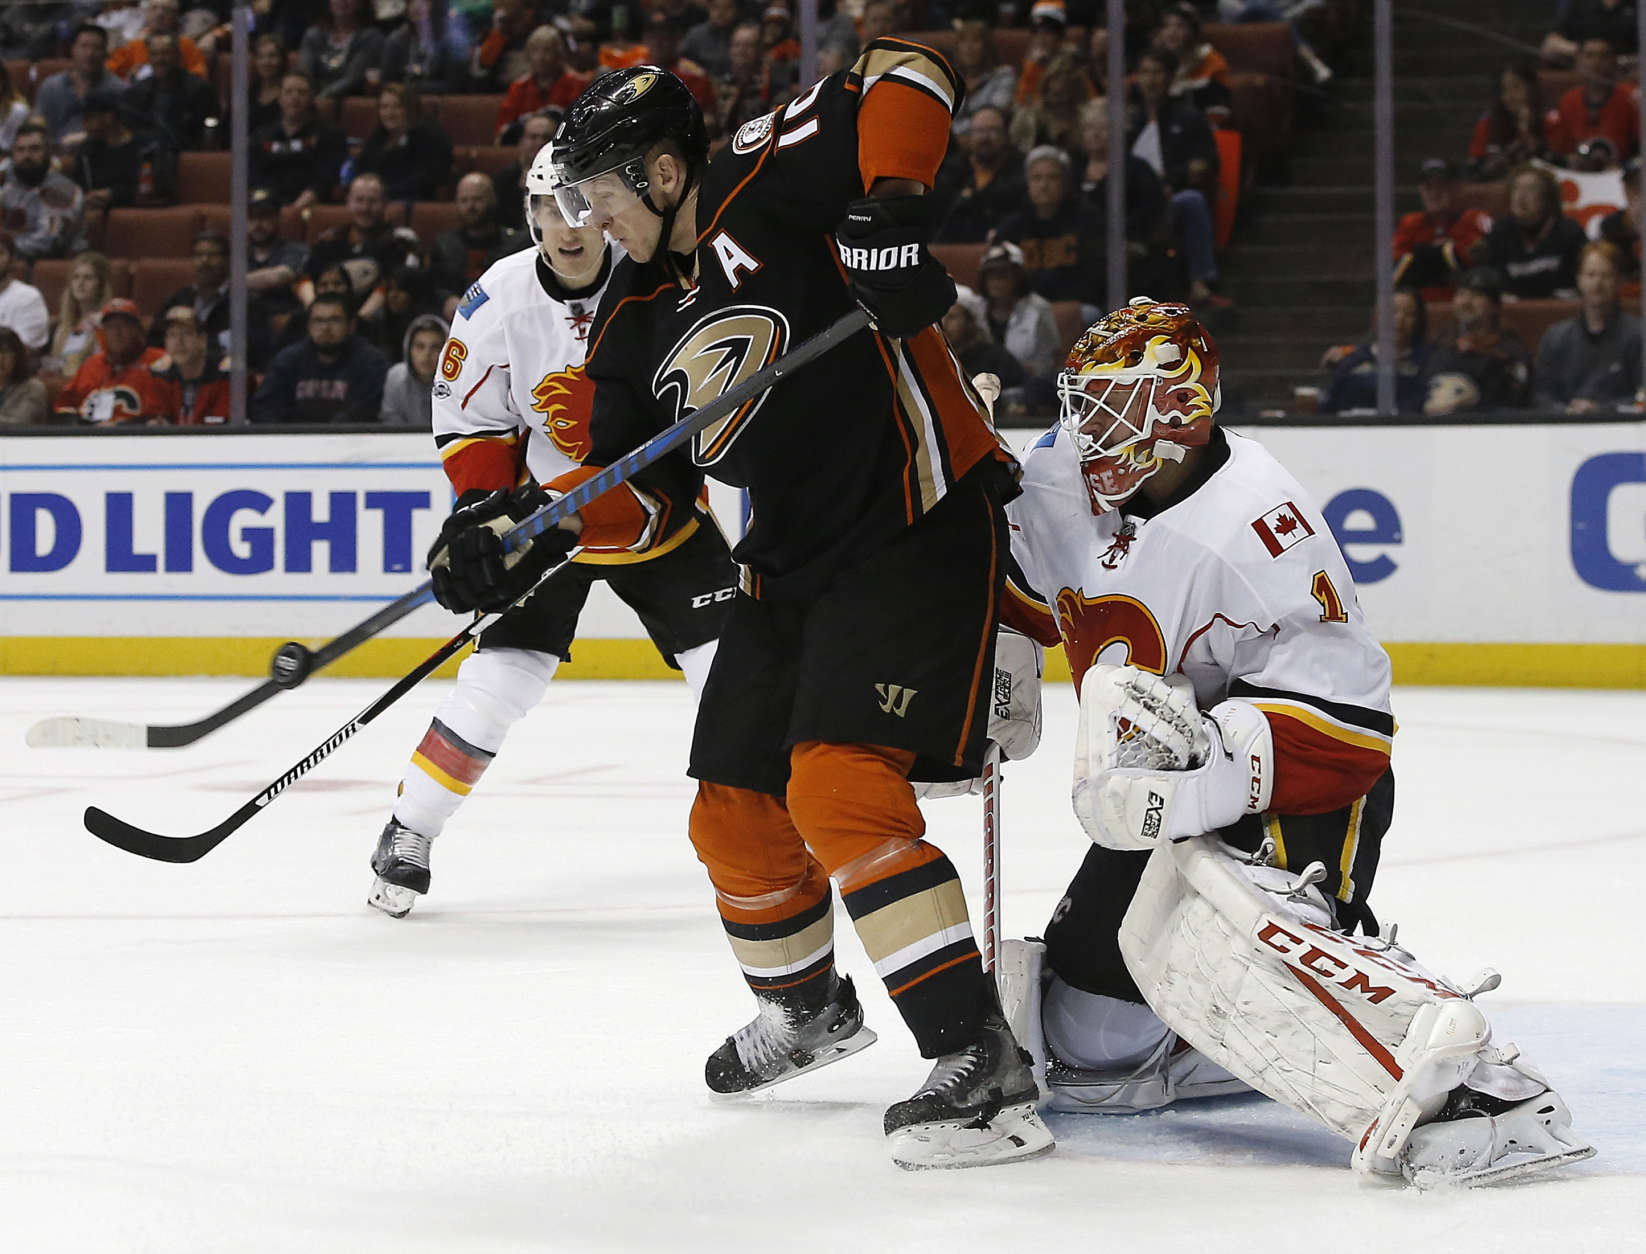 Anaheim Ducks right wing Corey Perry, left,, redirects the puck in front of Calgary Flames goalie Brian Elliott, right, as defenseman Michael Stone, rear, watches during the second period of an NHL hockey game in Anaheim, Calif., Tuesday, April 4, 2017. (AP Photo/Alex Gallardo)